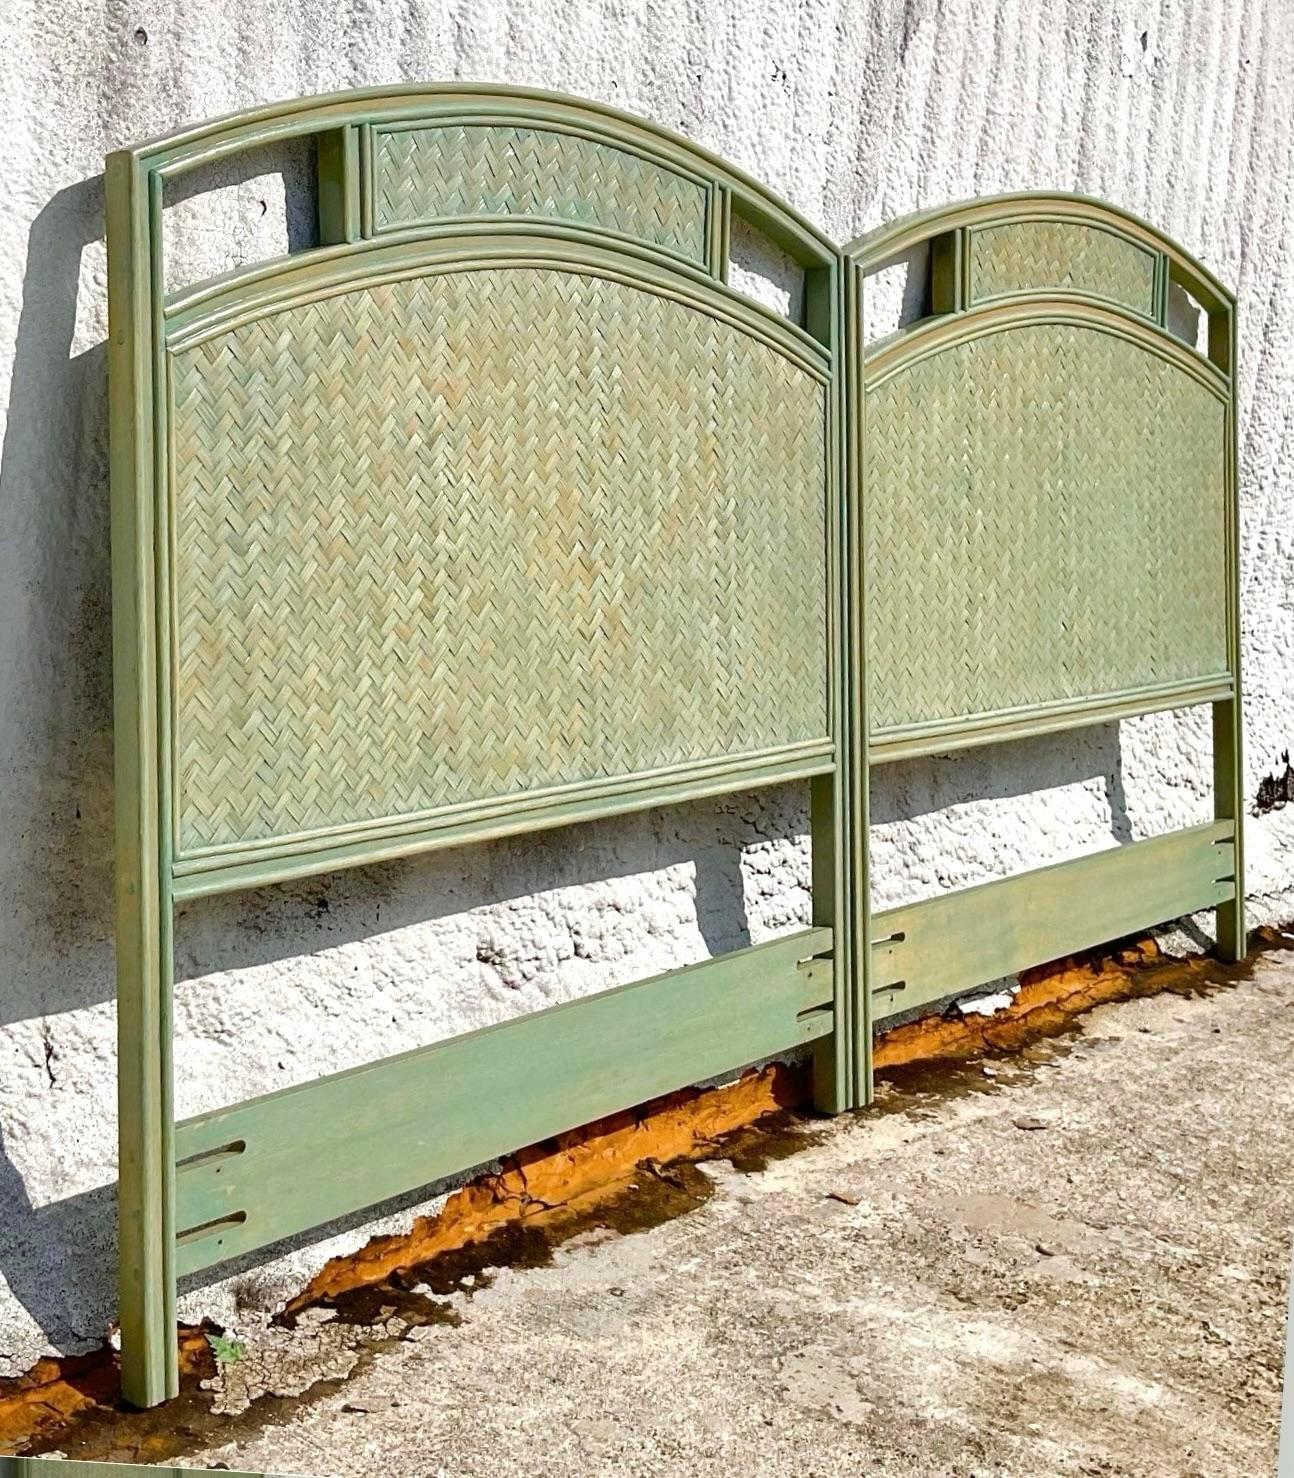 Vintage pair of twin rattan headboards that have chevron pattern with reed detailing around the edges. Fabulous Florida regency style rattan headboards that immediately add a sense worldly collection to a guest space. Of course can also be joined to